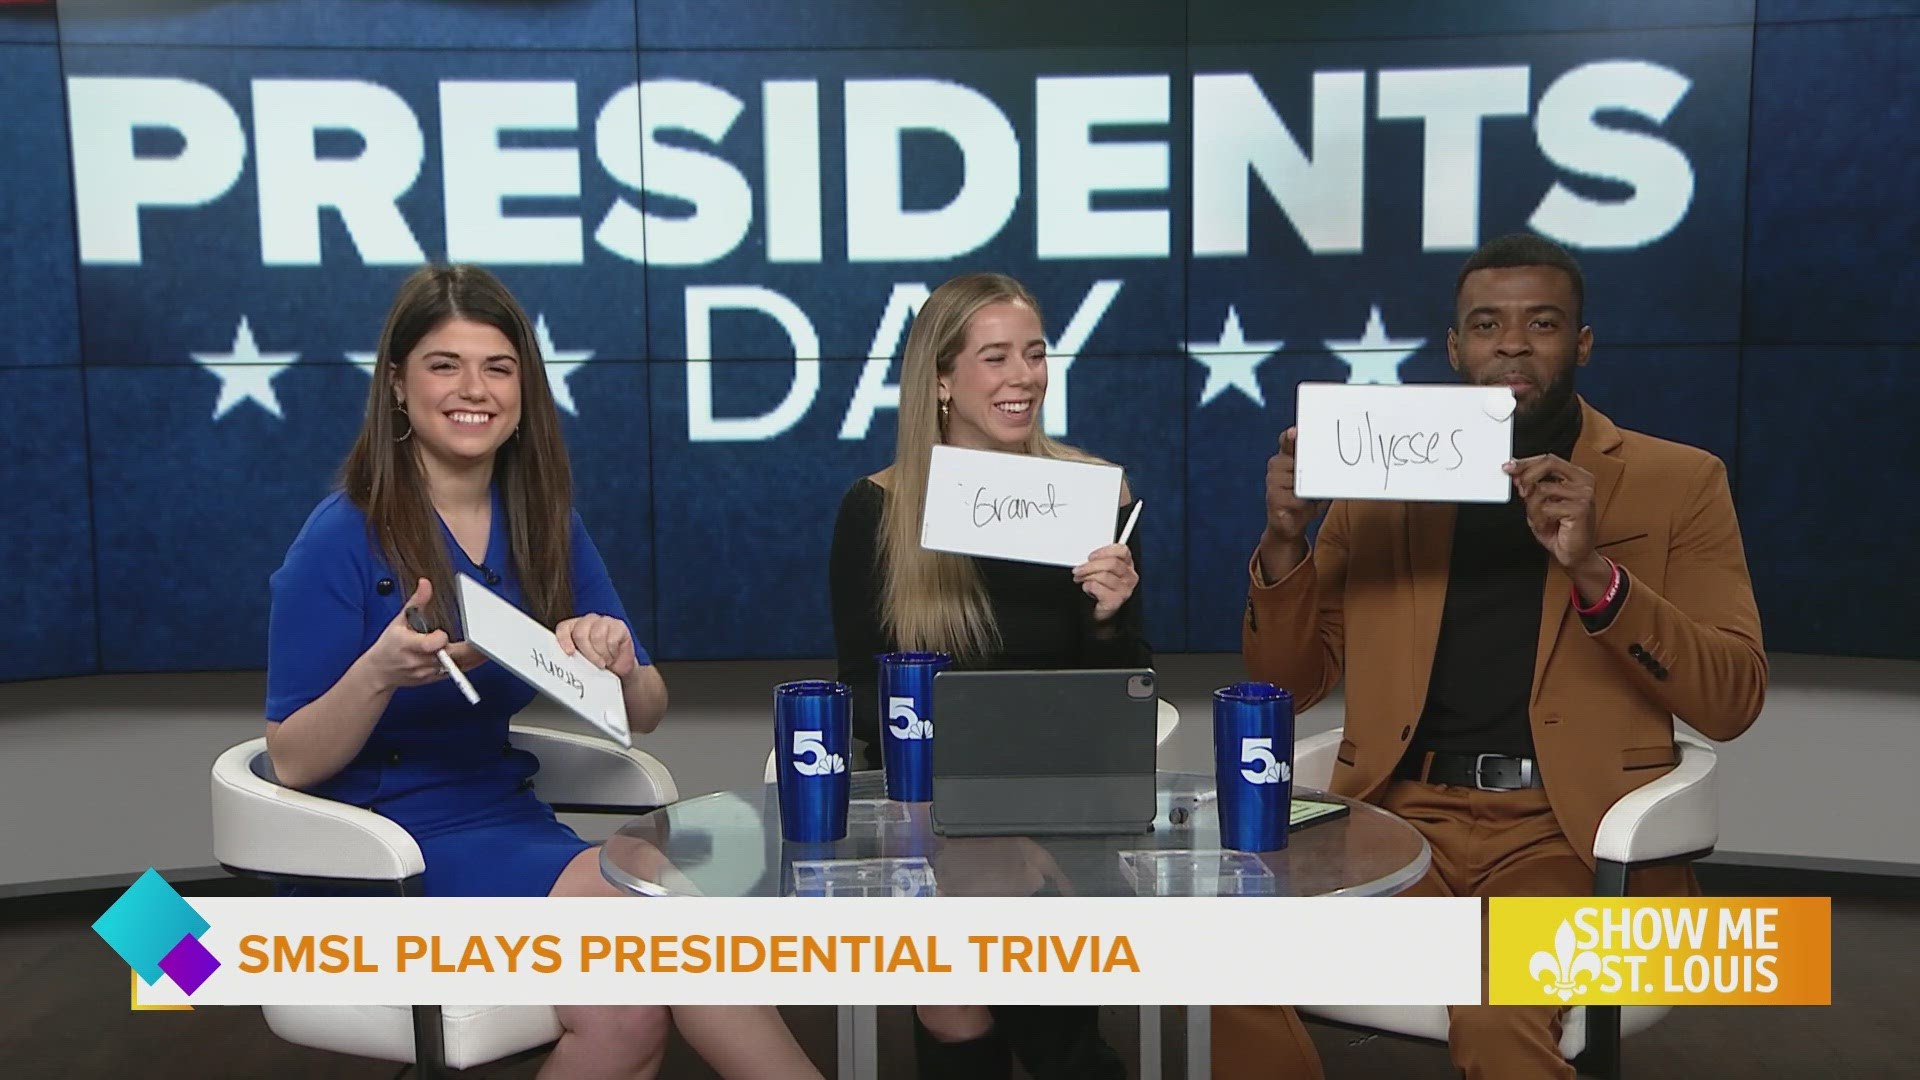 The SMSL team tests their knowledge about the U.S. presidents in today's trivia game.